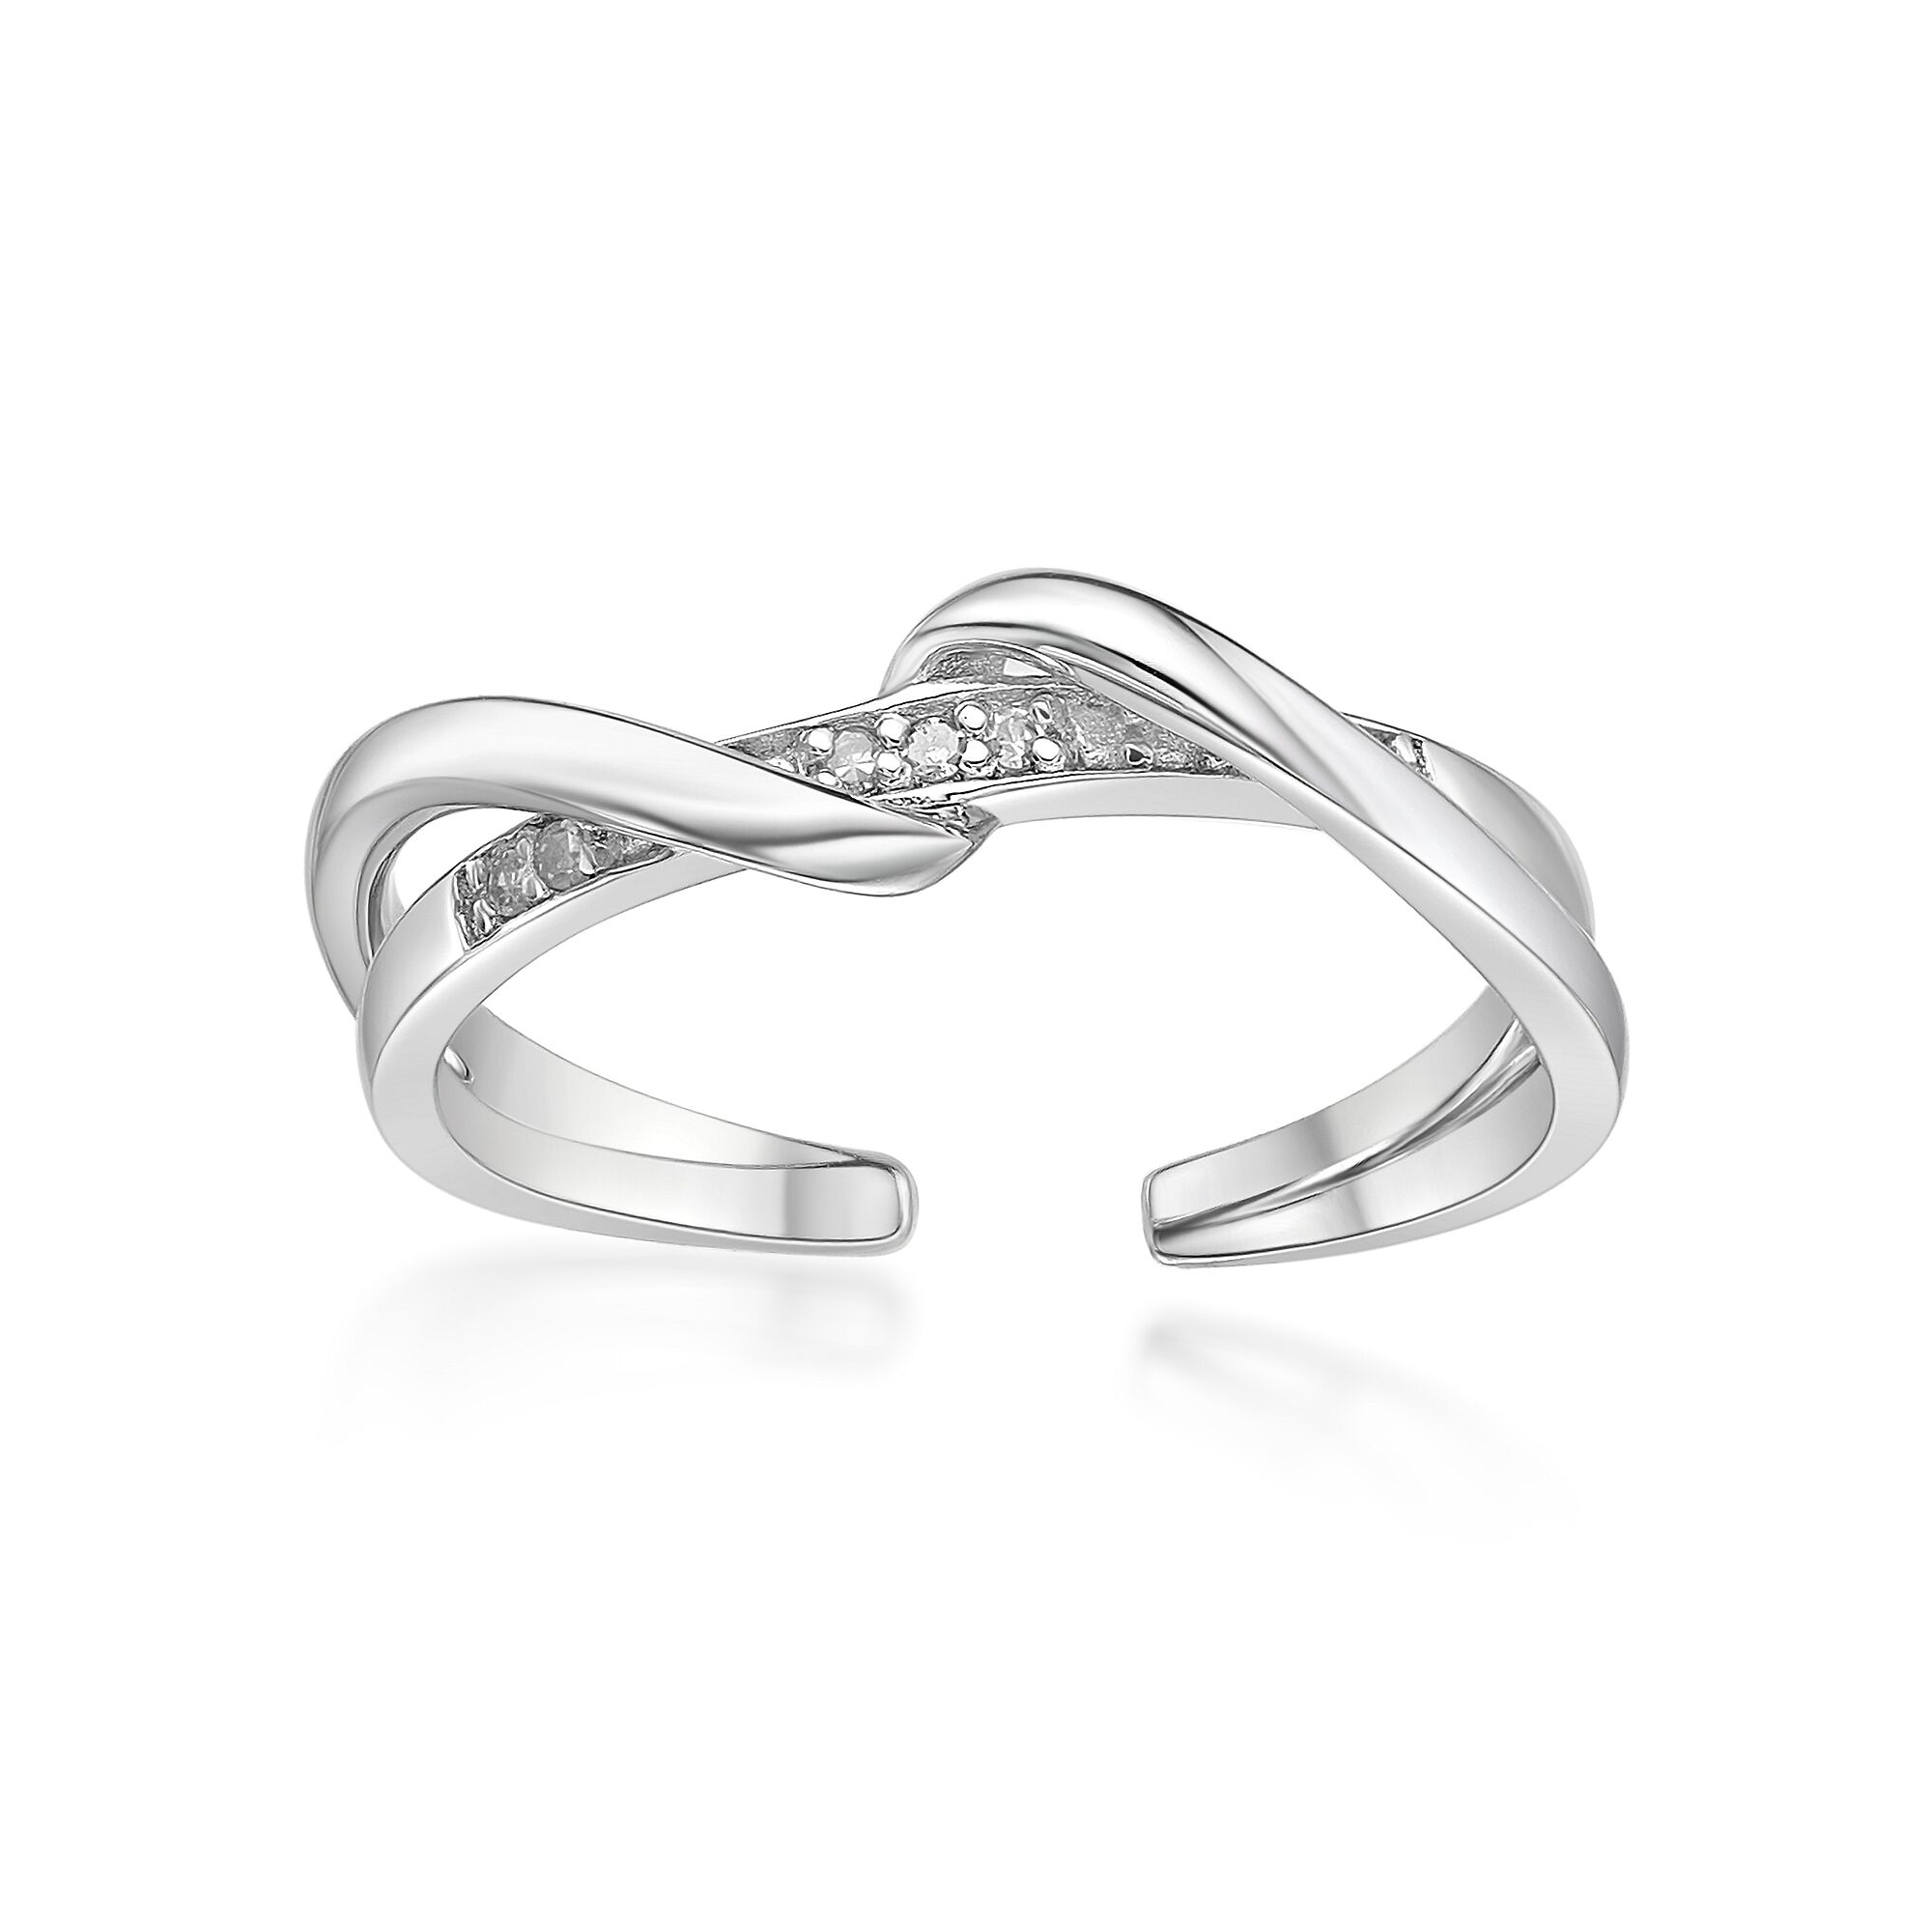 Women's Dual Twisted Adjustable Toe Ring, 925 Sterling Silver, .035 Cttw | Lavari Jewelers